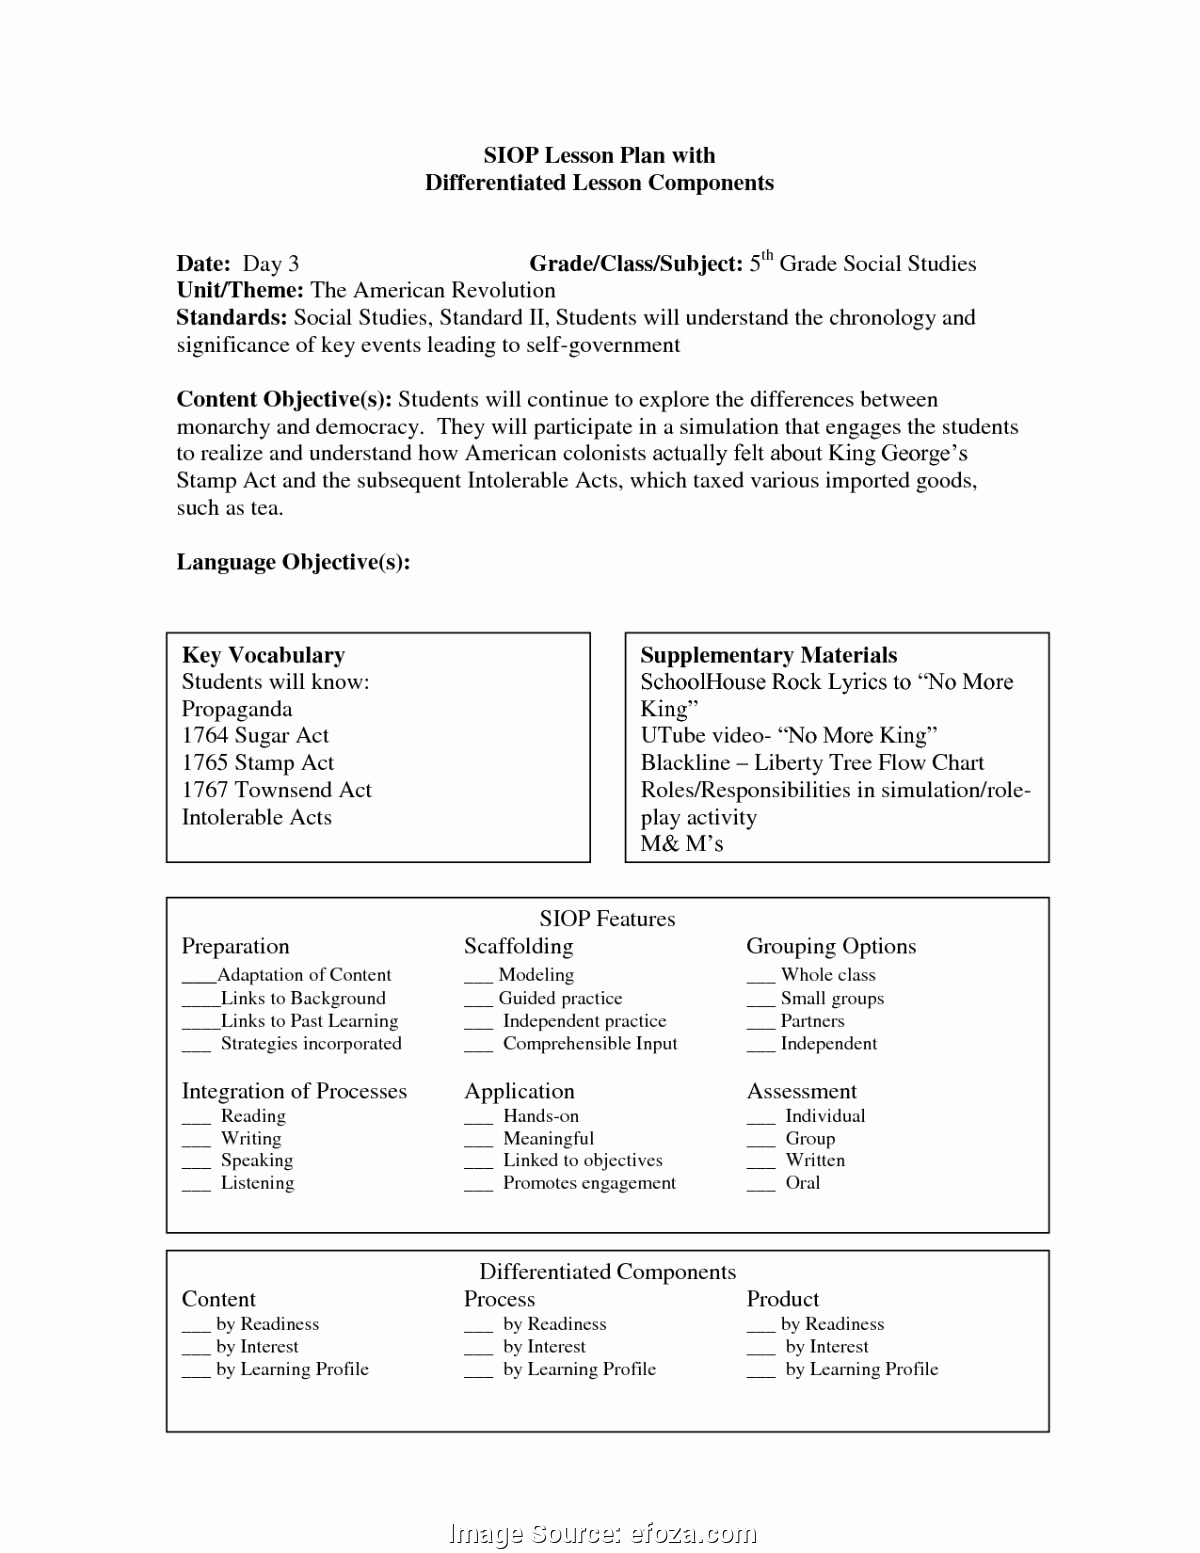 Siop Model Lesson Plan Template Fresh Regular Infant Lesson Plans Fall toddler Lesson Plan Template Young toddlers Weekly Schedul